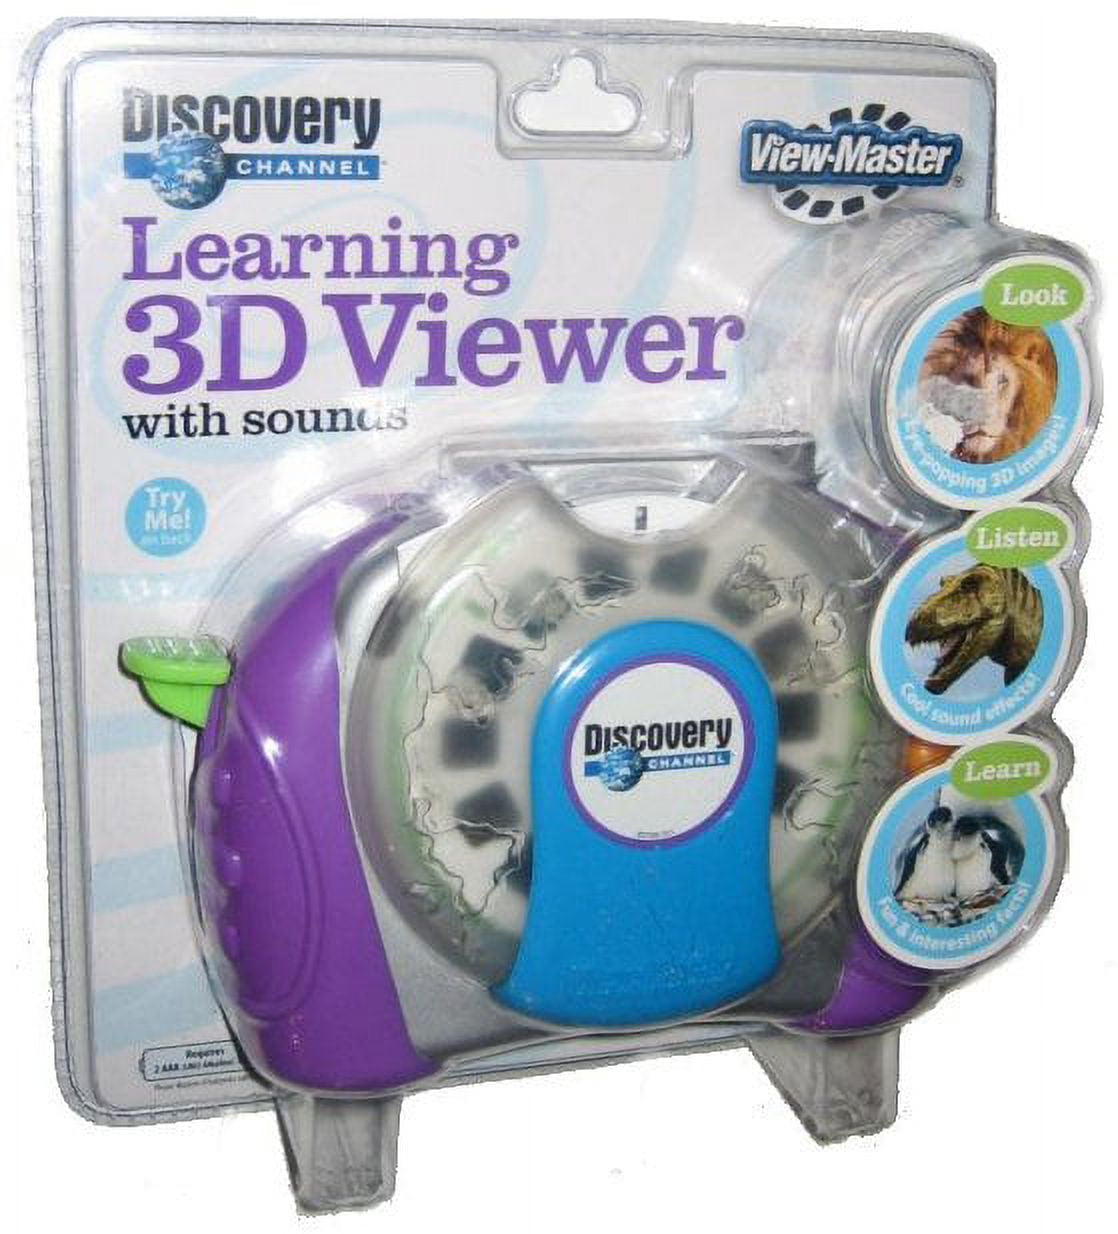 View Master Discovery Channel Fast Ship